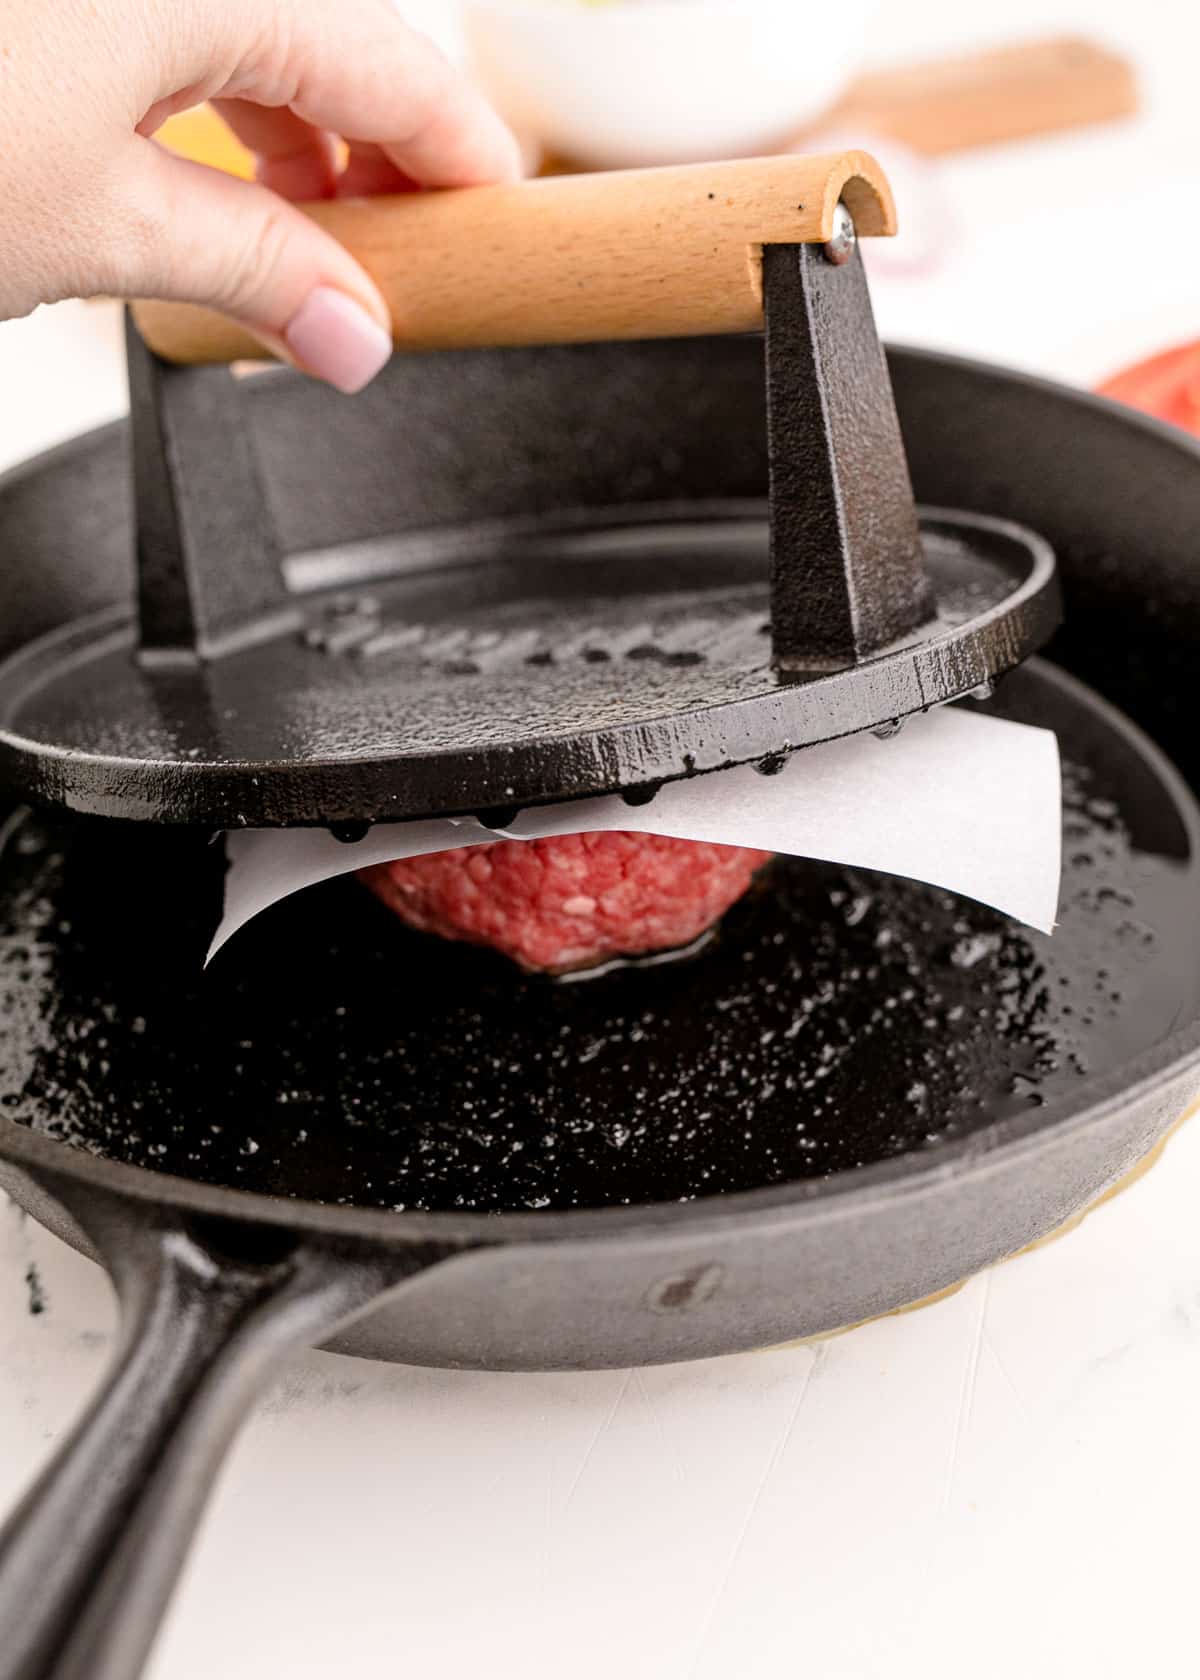 a heavy cast iron meat mallet is being pressed onto a piece of parchment paper on the ball of ground beef in the cast iron skillet